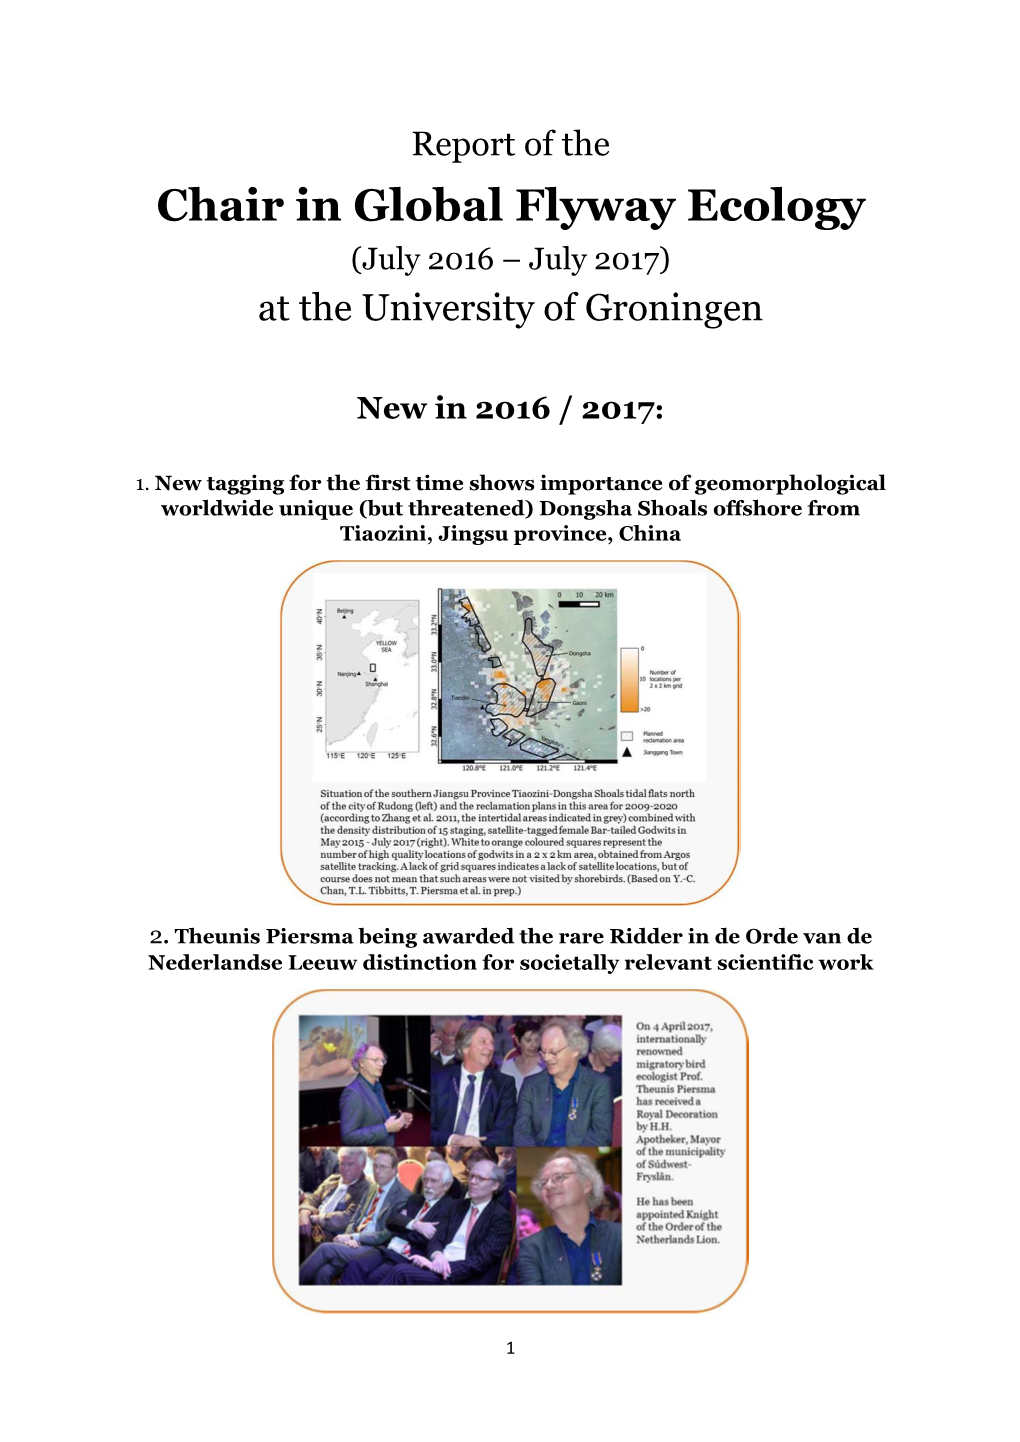 Chair in Global Flyway Ecology (July 2016 – July 2017) at the University of Groningen